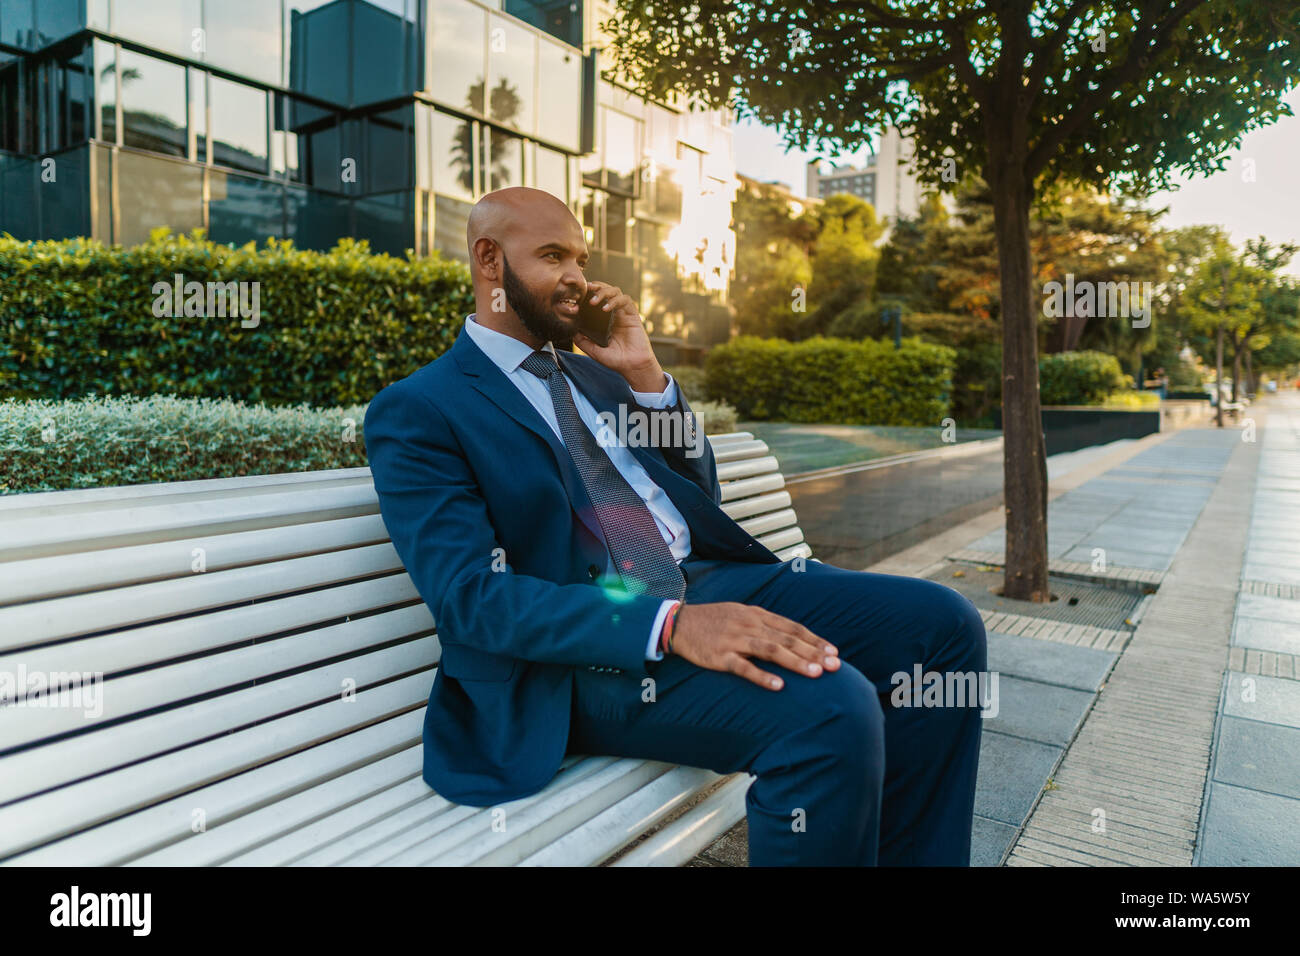 Indian businessman holding mobile phone wearing blue suit Stock Photo